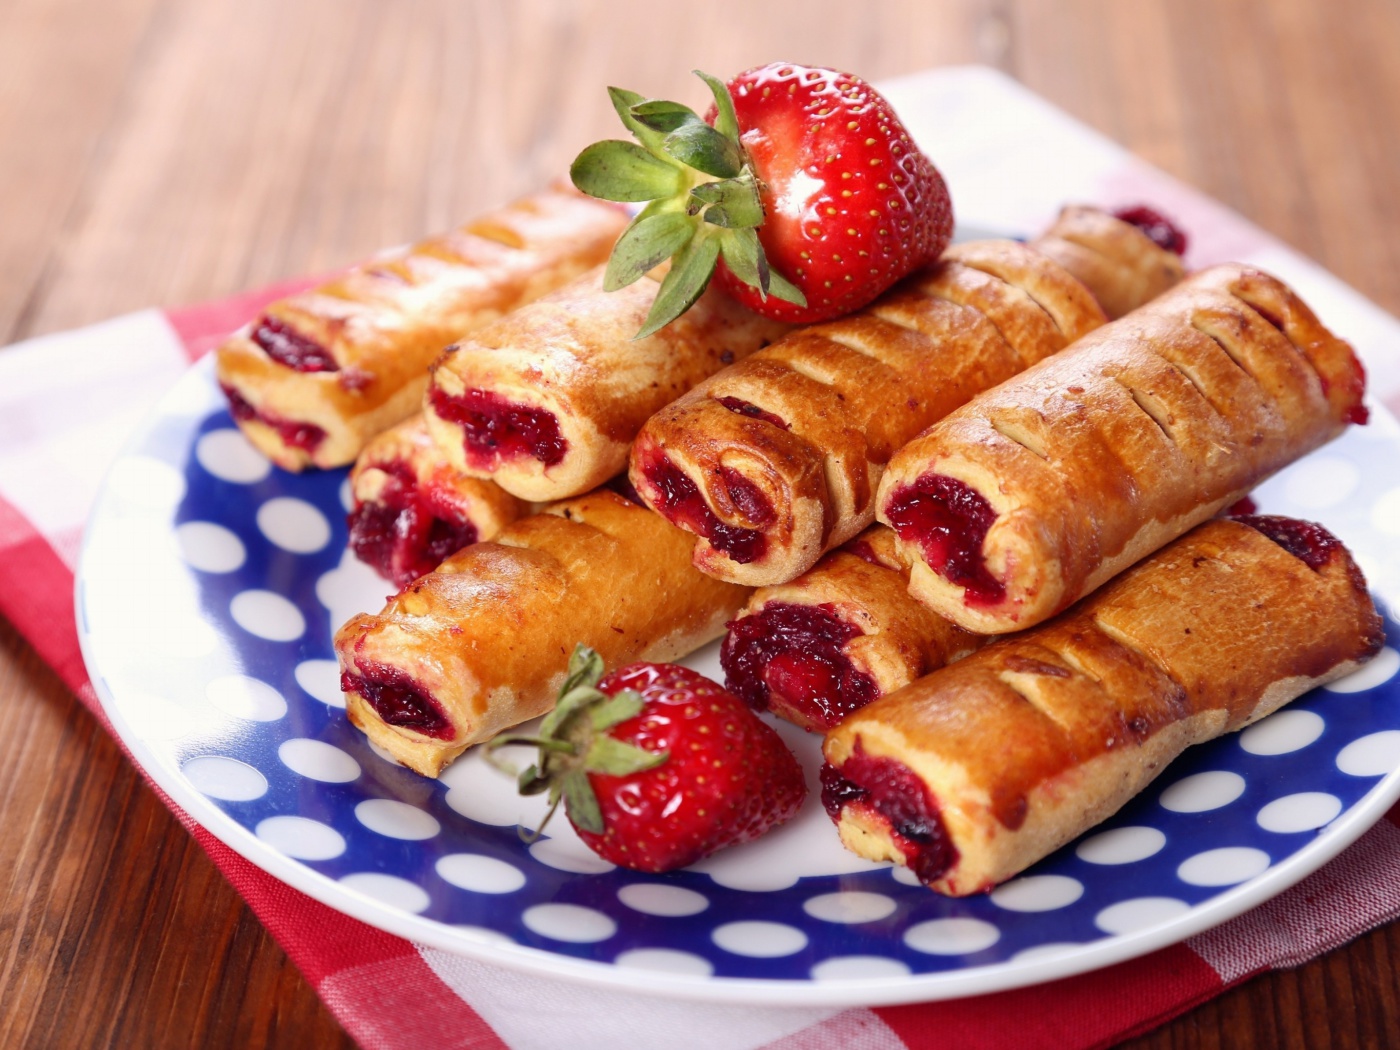 Pastry with Jam wallpaper 1400x1050